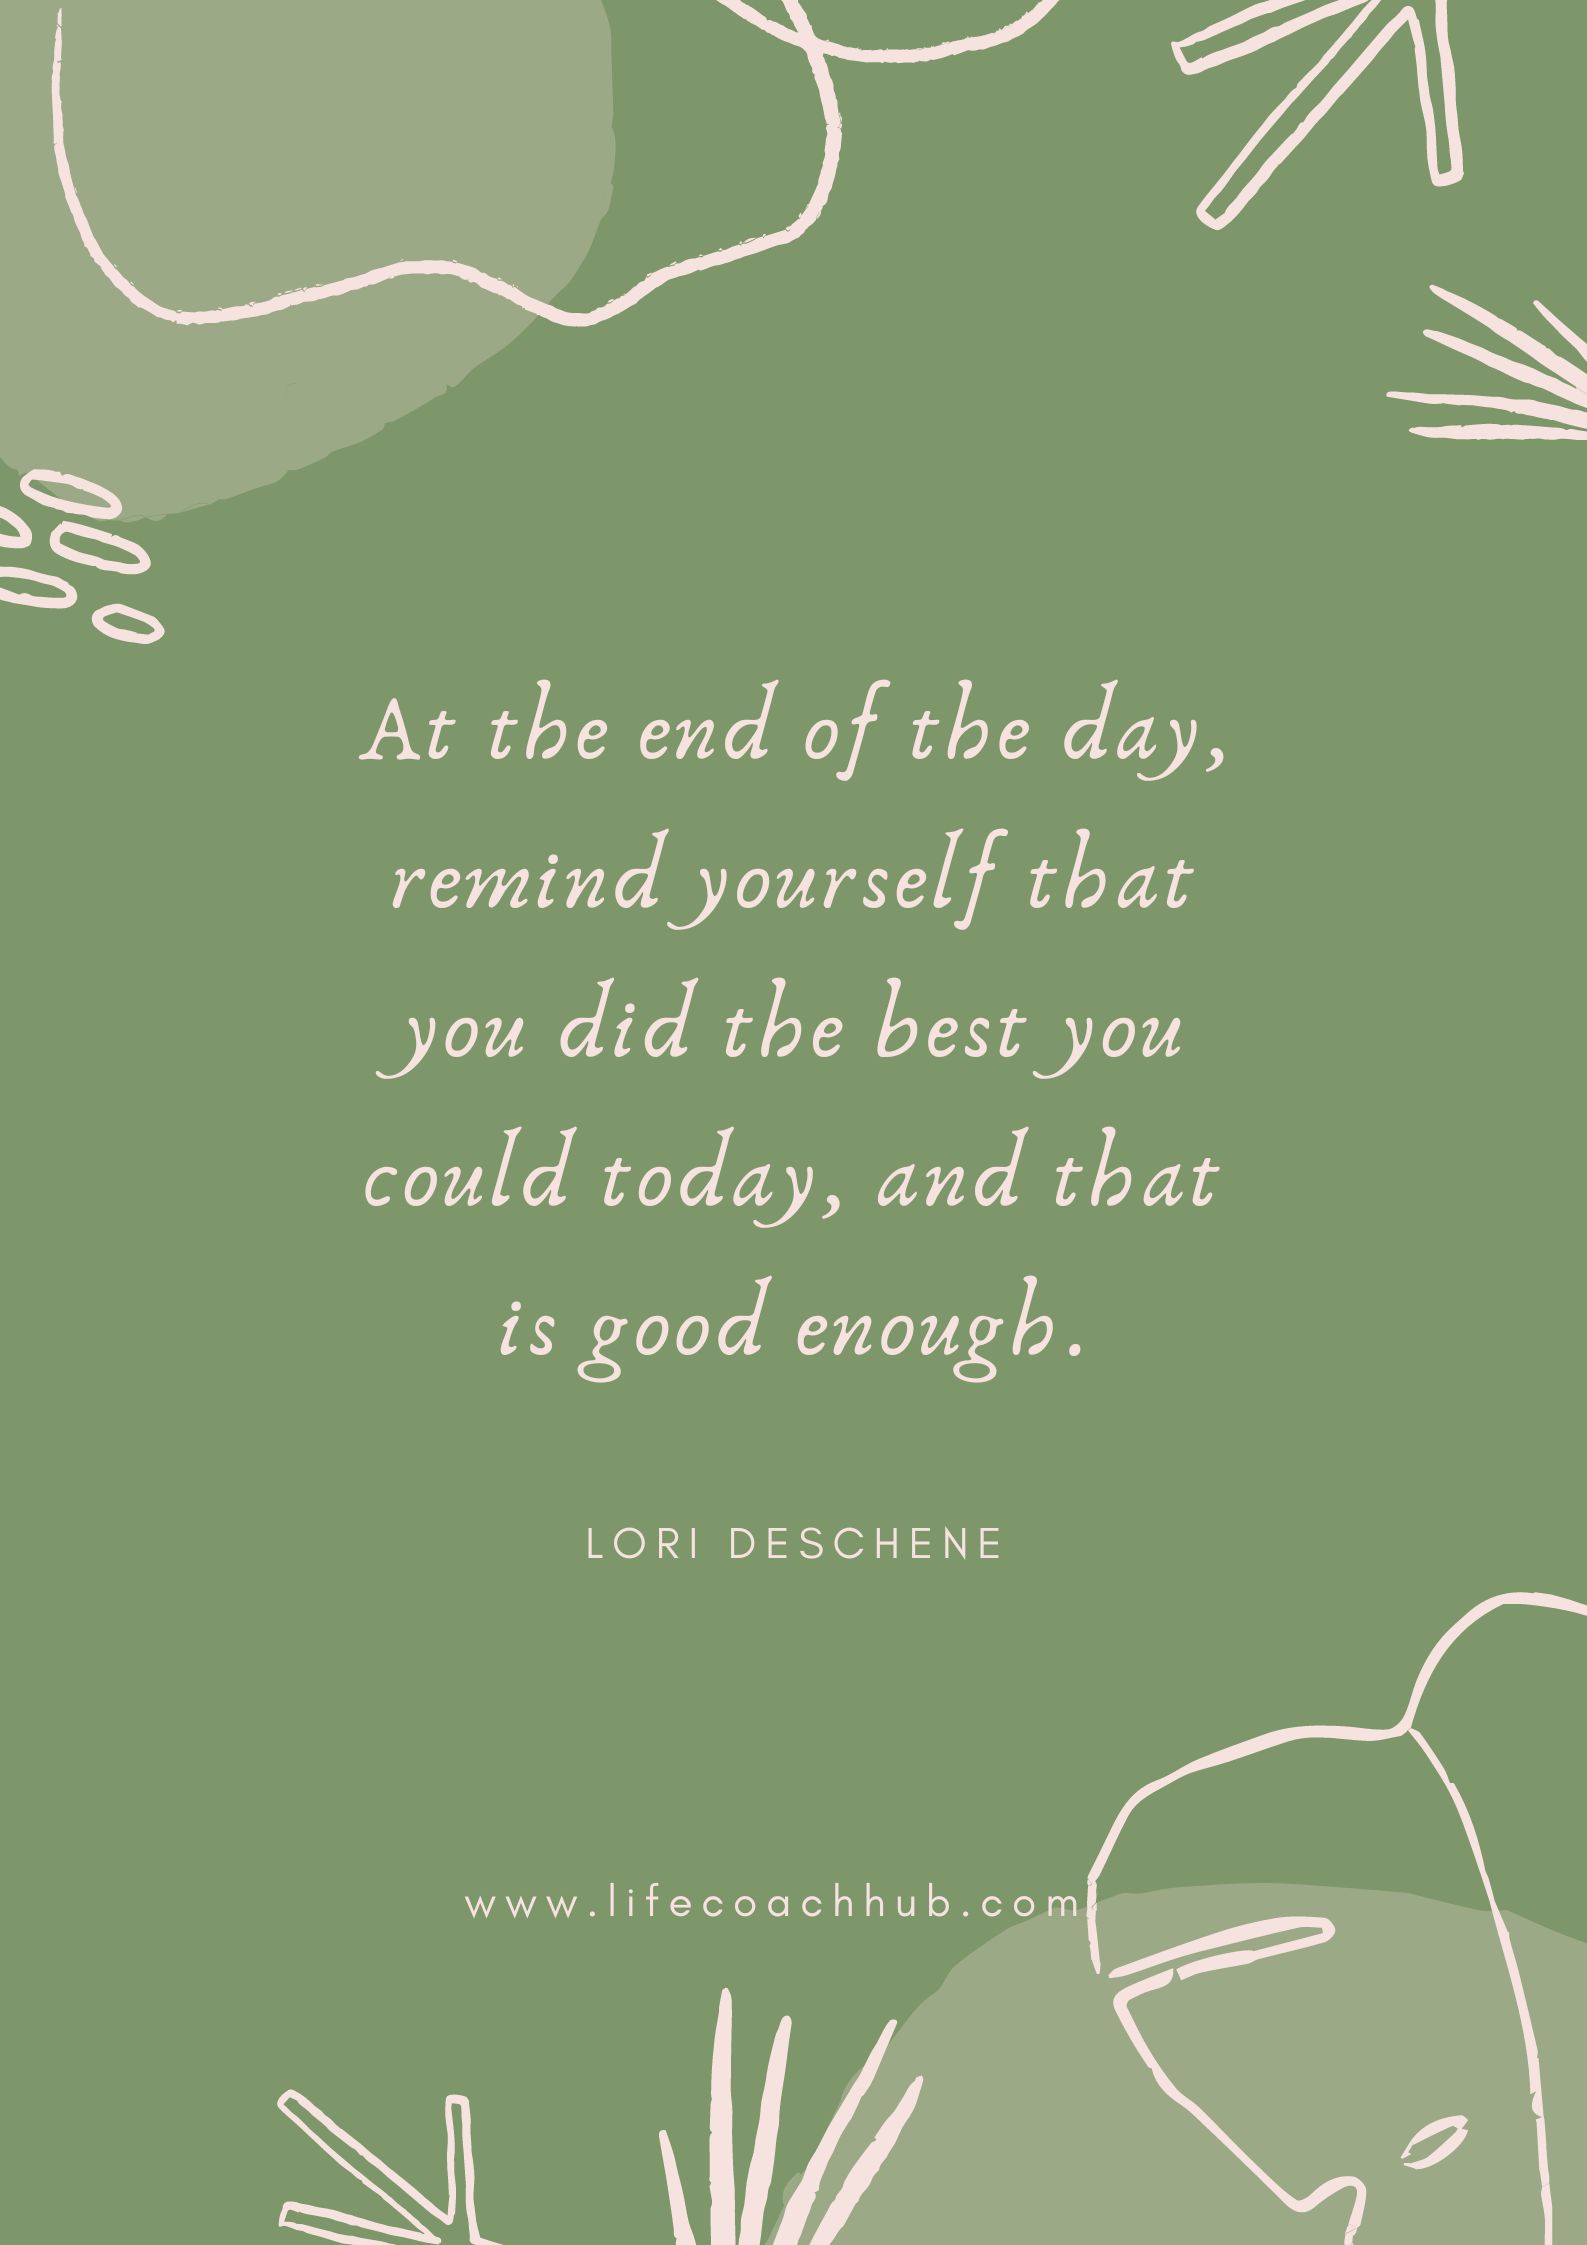 At the end of the day, remind yourself that you did the best you could today, and that is good enough. Lori Deschene, coaching tip